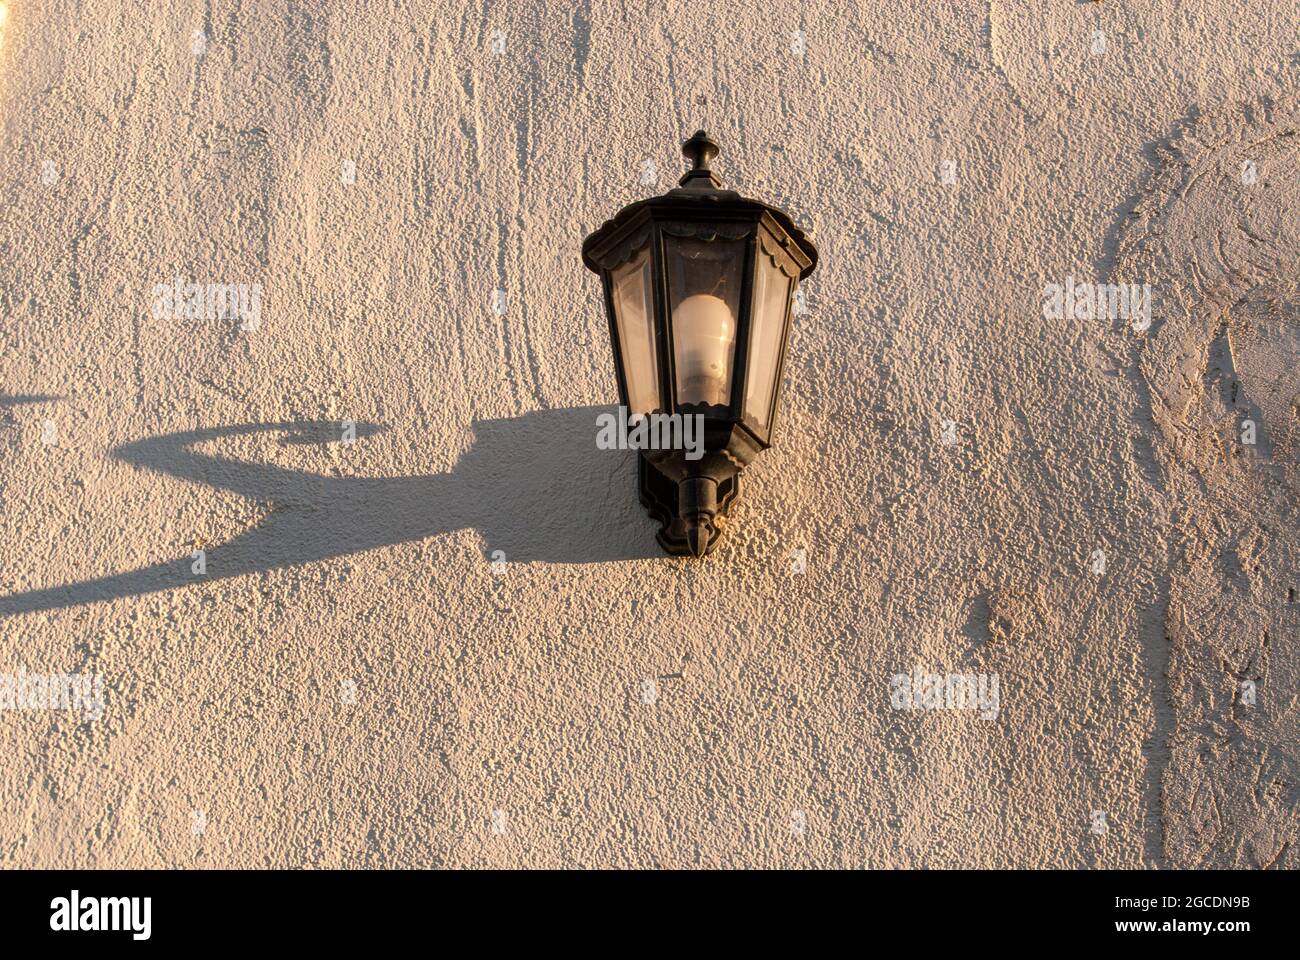 Schattenspiel: Laterne  im Abendlicht in Südfrankreich - shadow play: an antique lantern at a vineyard in the evening light in the South of France. Stock Photo